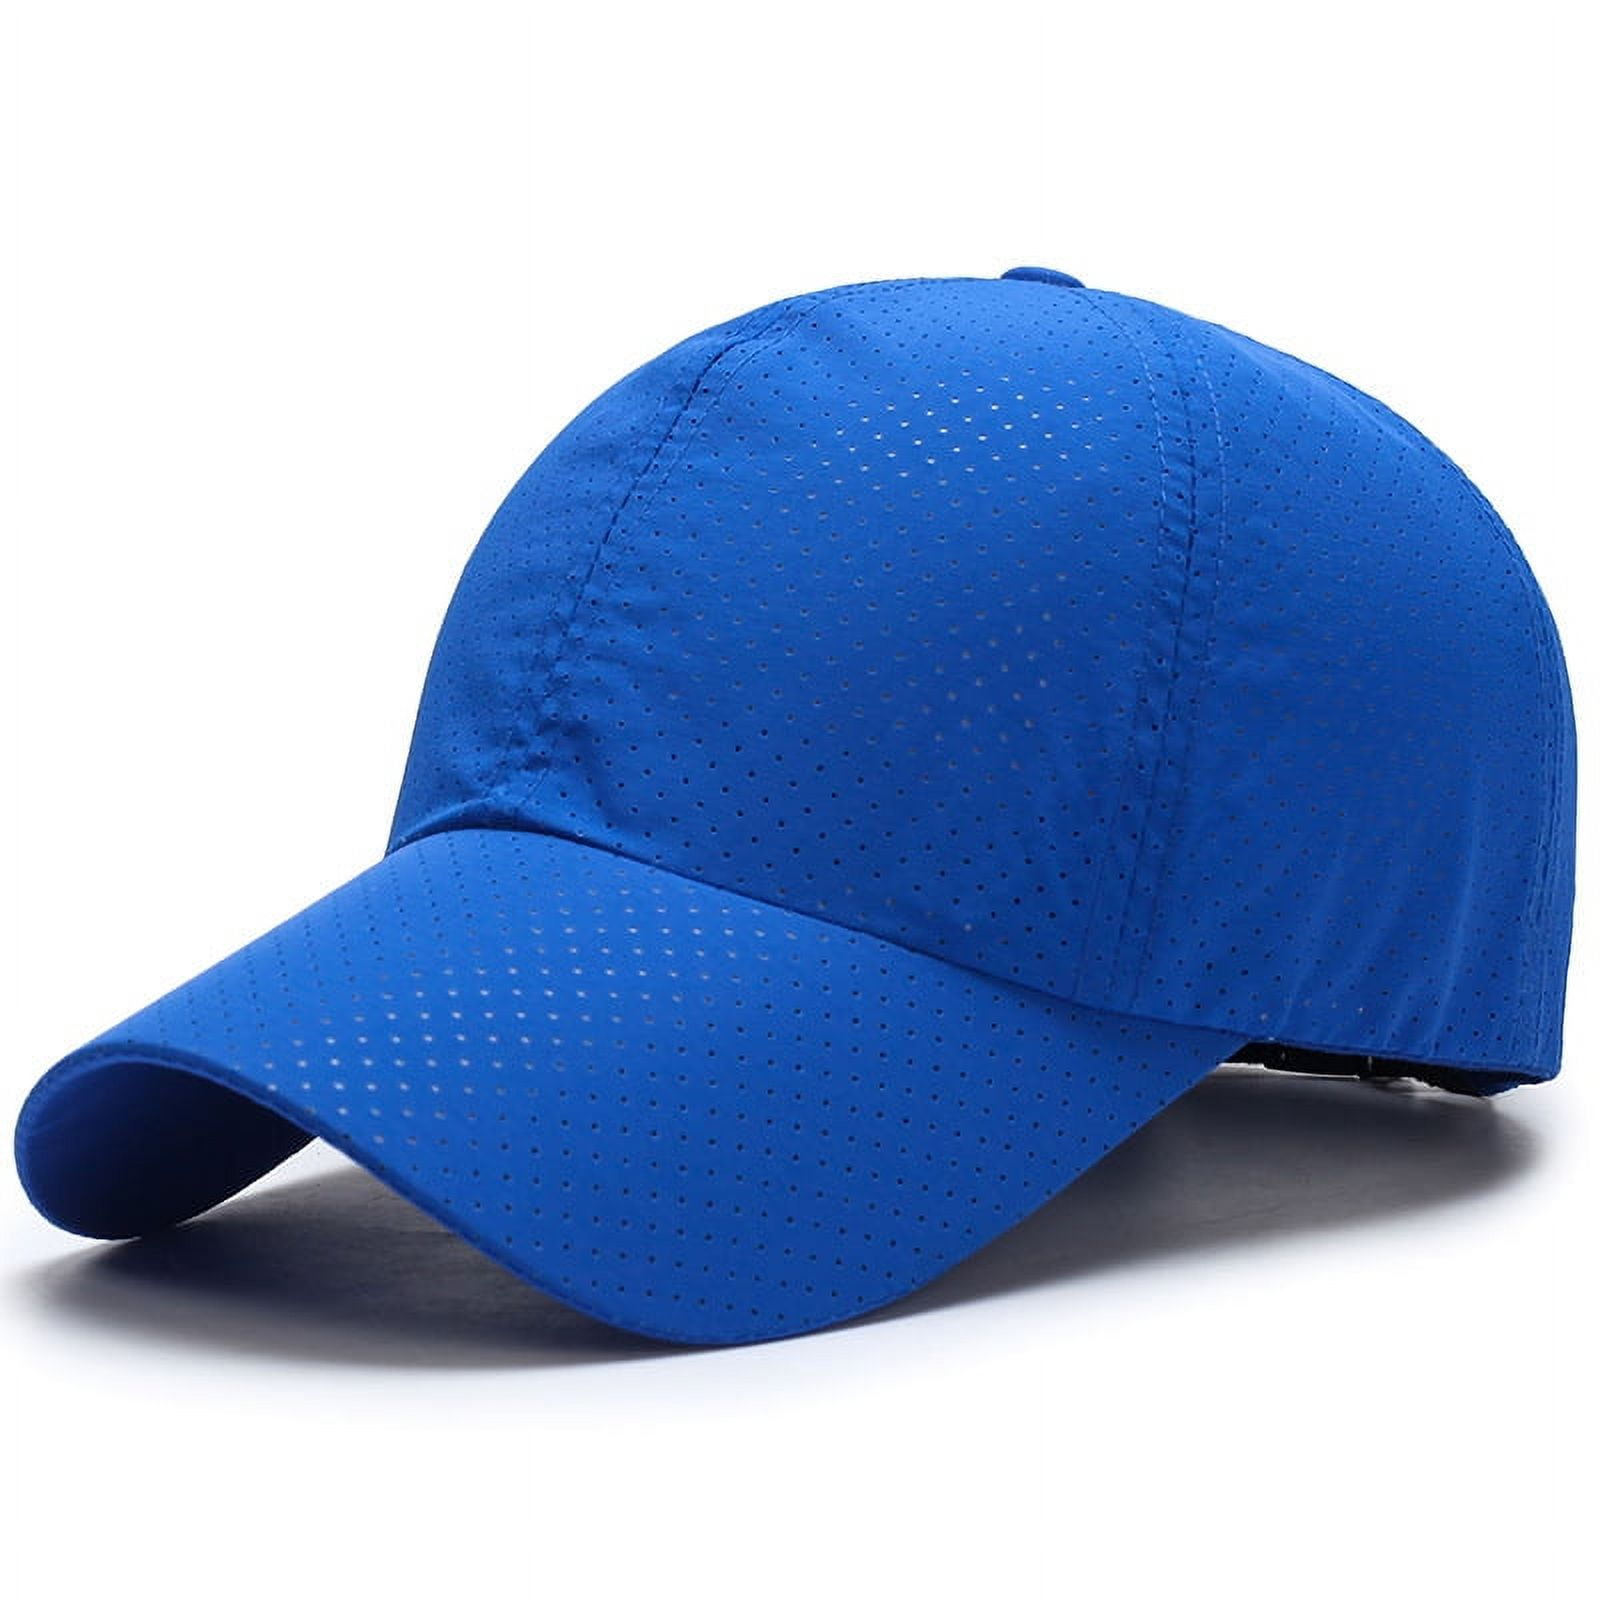 Baseball Unstructured Sports Lightweight Dry Breathable Quick Cap Hat